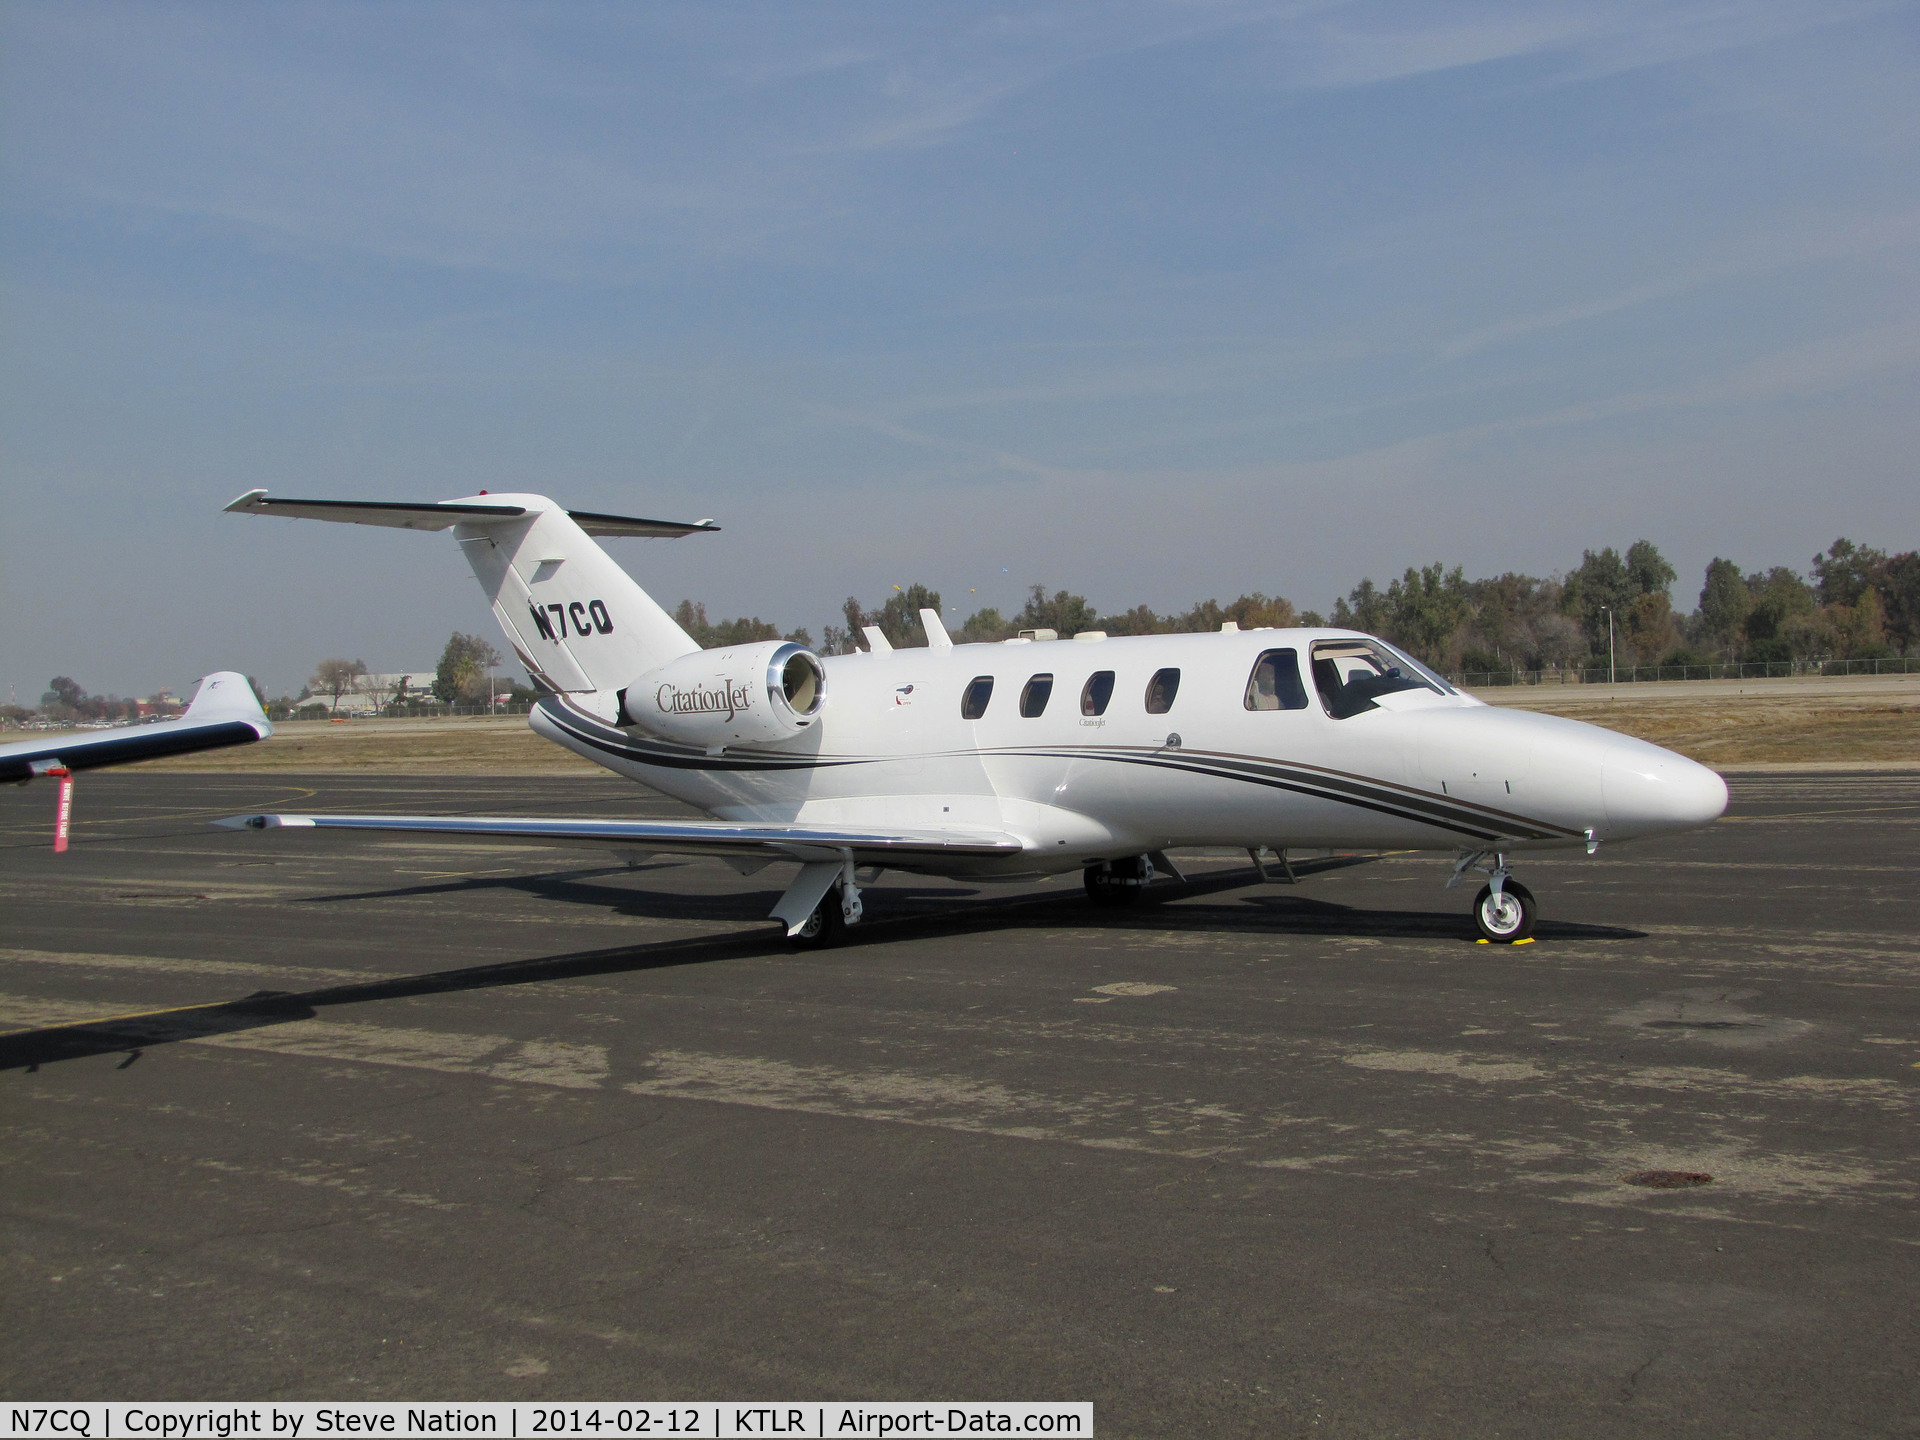 N7CQ, 1993 Cessna 525 CitationJet C/N 525-0004, IBL Aircraft (Marysville, CA) Cessna 525 in for International Ag Expo 2014